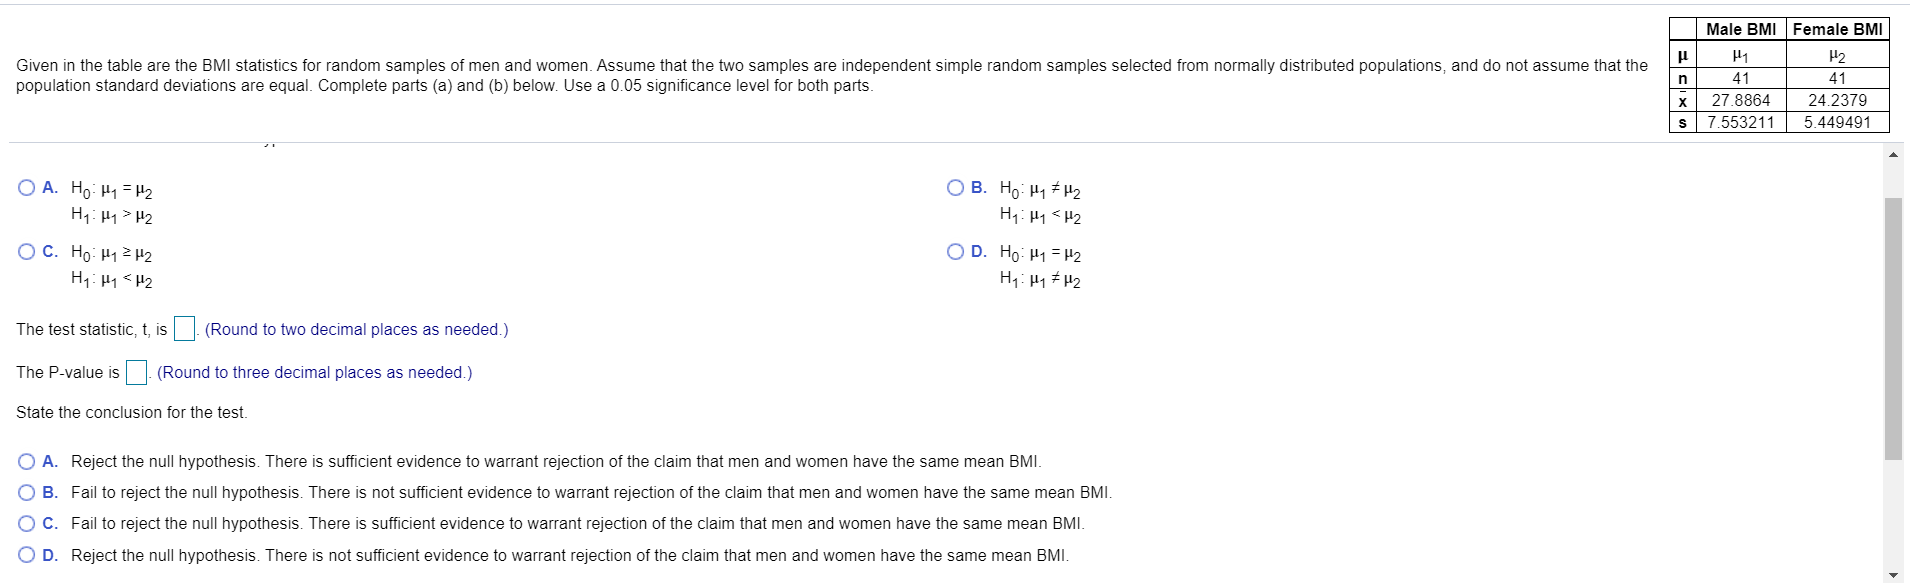 Male BMI Female BMI
H2
Given in the table are the BMI statistics for random samples of men and women. Assume that the two samples are independent simple random samples selected from normally distributed populations, and do not assume that the
population standard deviations are equal. Complete parts (a) and (b) below. Use a 0.05 significance level for both parts.
41
41
X
27.8864
24.2379
7.553211
5.449491
O A. Ho: H1= H2
H1: H1> H2
O B. Ho: H1 # H2
H1: H1 <H2
O D. Ho: H1 = H2
O C. Ho: H1H2
H1: H1<H2
H1: H1 # H2
The test statistic, t, is
(Round to two decimal places as needed.)
The P-value is
(Round to three decimal places as needed.)
State the conclusion for the test.
A. Reject
null hypothesis. There is sufficient evidence to warrant rejection
the claim
men and women have the same mean BMI.
B. Fail to reject the null hypothesis. There is not sufficient evidence to warrant rejection of the claim that men and women have the same mean BMI.
C. Fail to reject the null hypothesis. There is sufficient evidence to warrant rejection of the claim that men and women have the same mean BMI.
D. Reject the null hypothesis. There is not sufficient evidence to warrant rejection of the claim that men and women have the same mean BMI.
